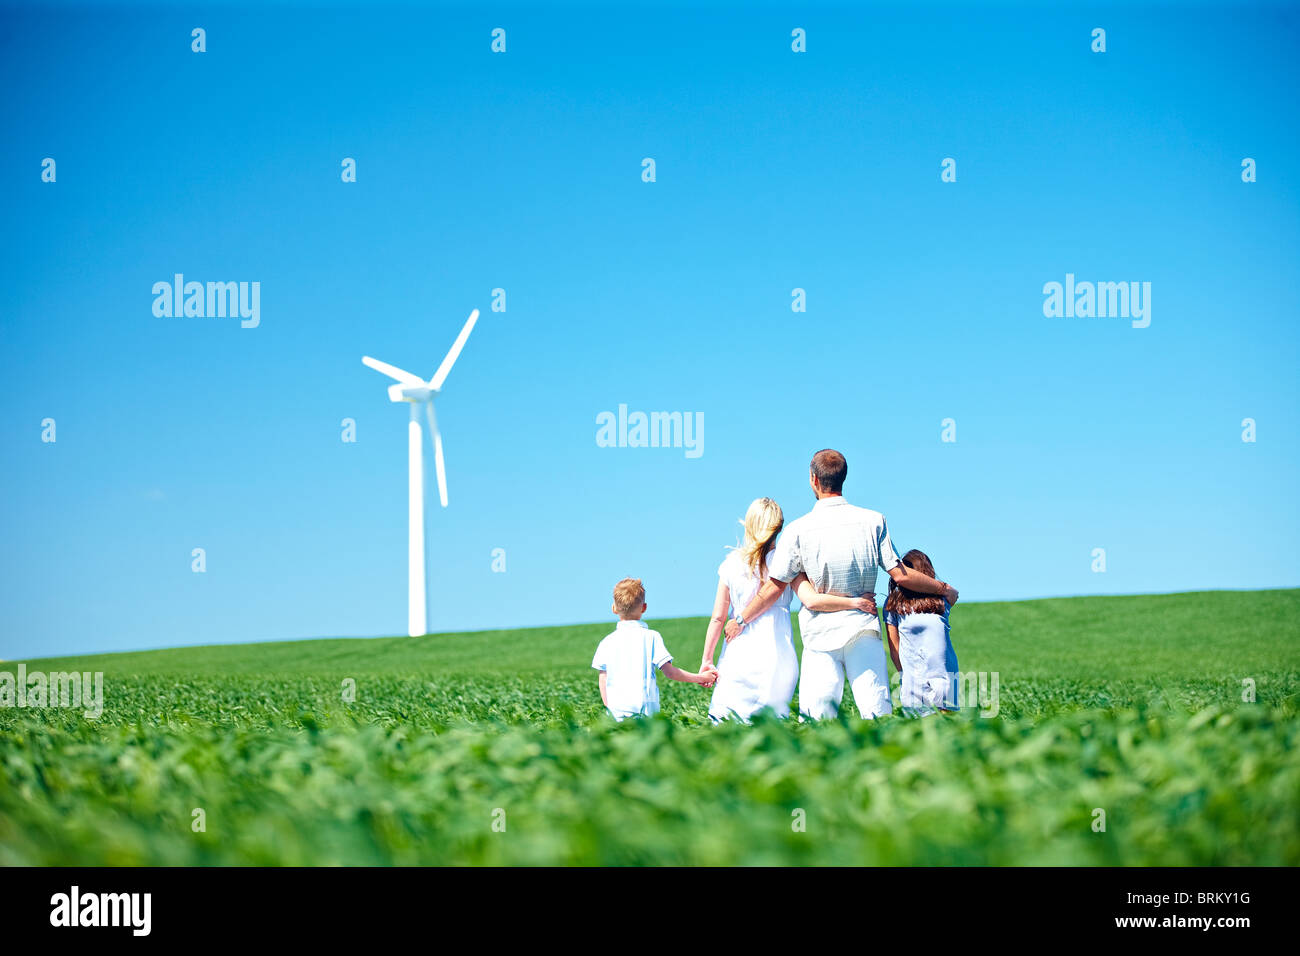 Family looking at wind turbine Banque D'Images